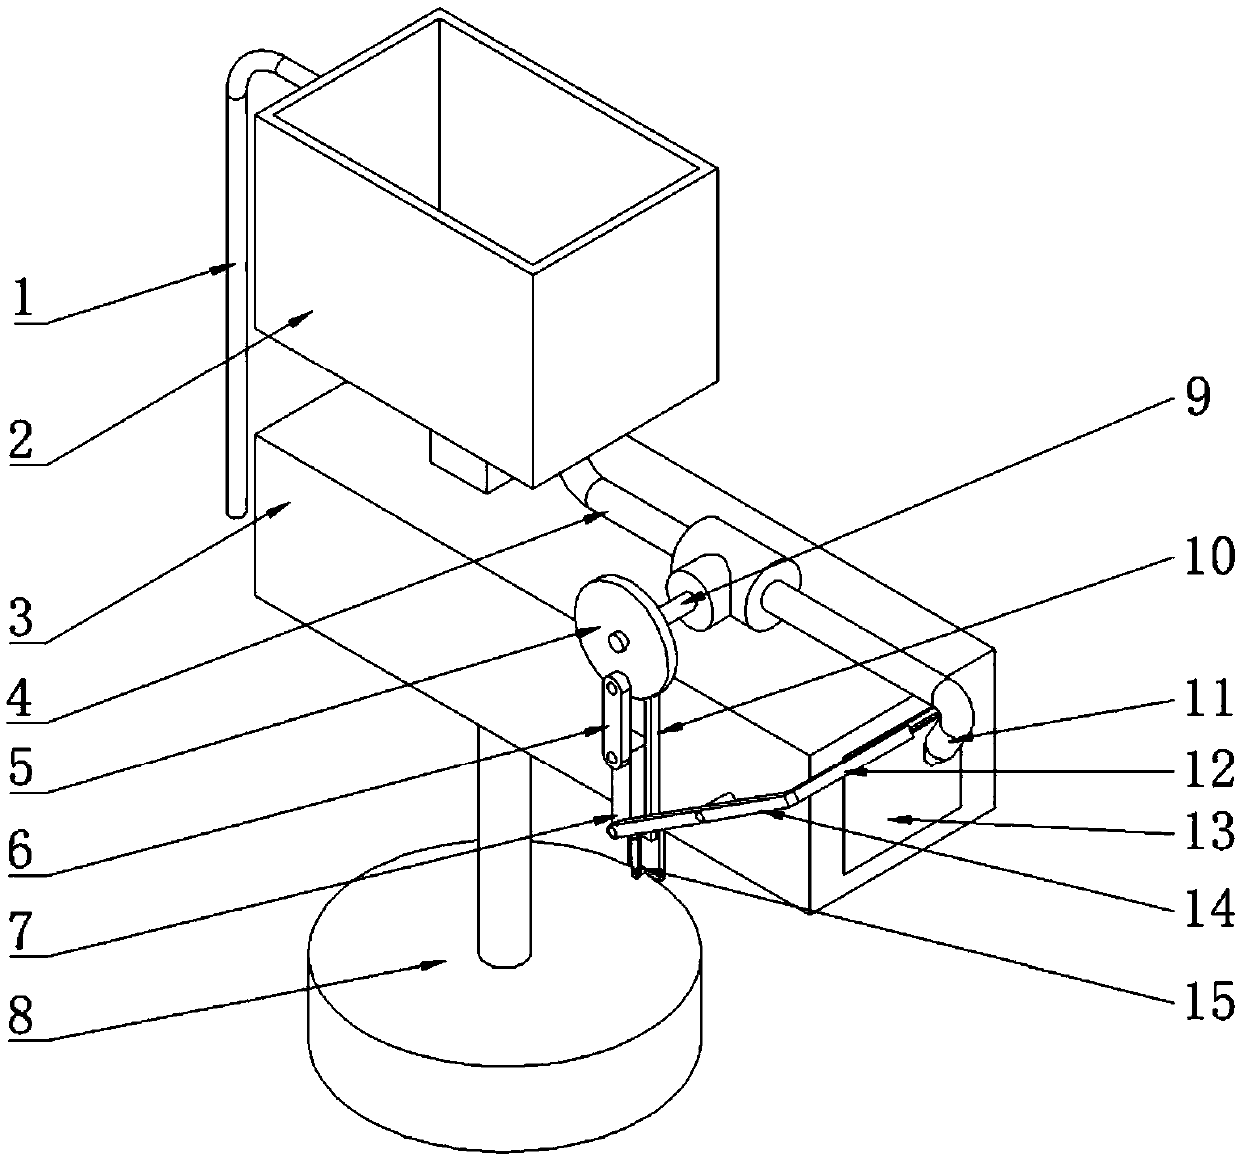 Self-cleaning monitoring device